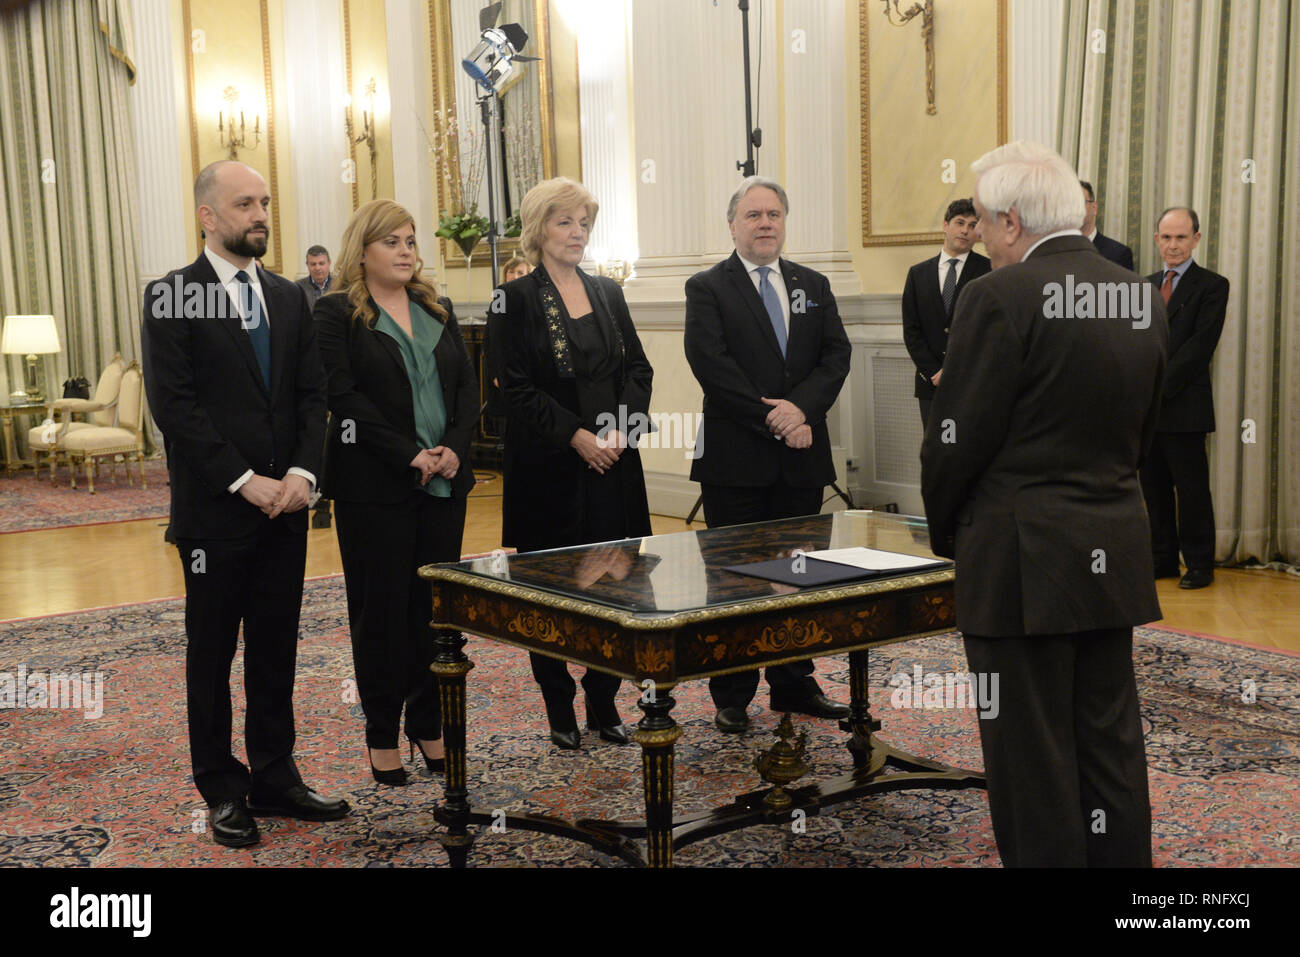 Athens, Greece. 18th Feb, 2019. From the left: Konstantinos Barkas, new Deputy Minister of Labor, Social Security and Social Solidarity, Eleftheria Chatzigeorgiou, new Deputy Minister of the Interior, Athanasia Anagnostopoulou, new Deputy Minister of Foreign Affairs and Georgios Katrougalos, new Minister of Foreign Affairs, during the political oath to the President of Hellenic Republic Prokopis Pavlopoulos. Credit: Dimitrios Karvountzis/Pacific Press/Alamy Live News Stock Photo